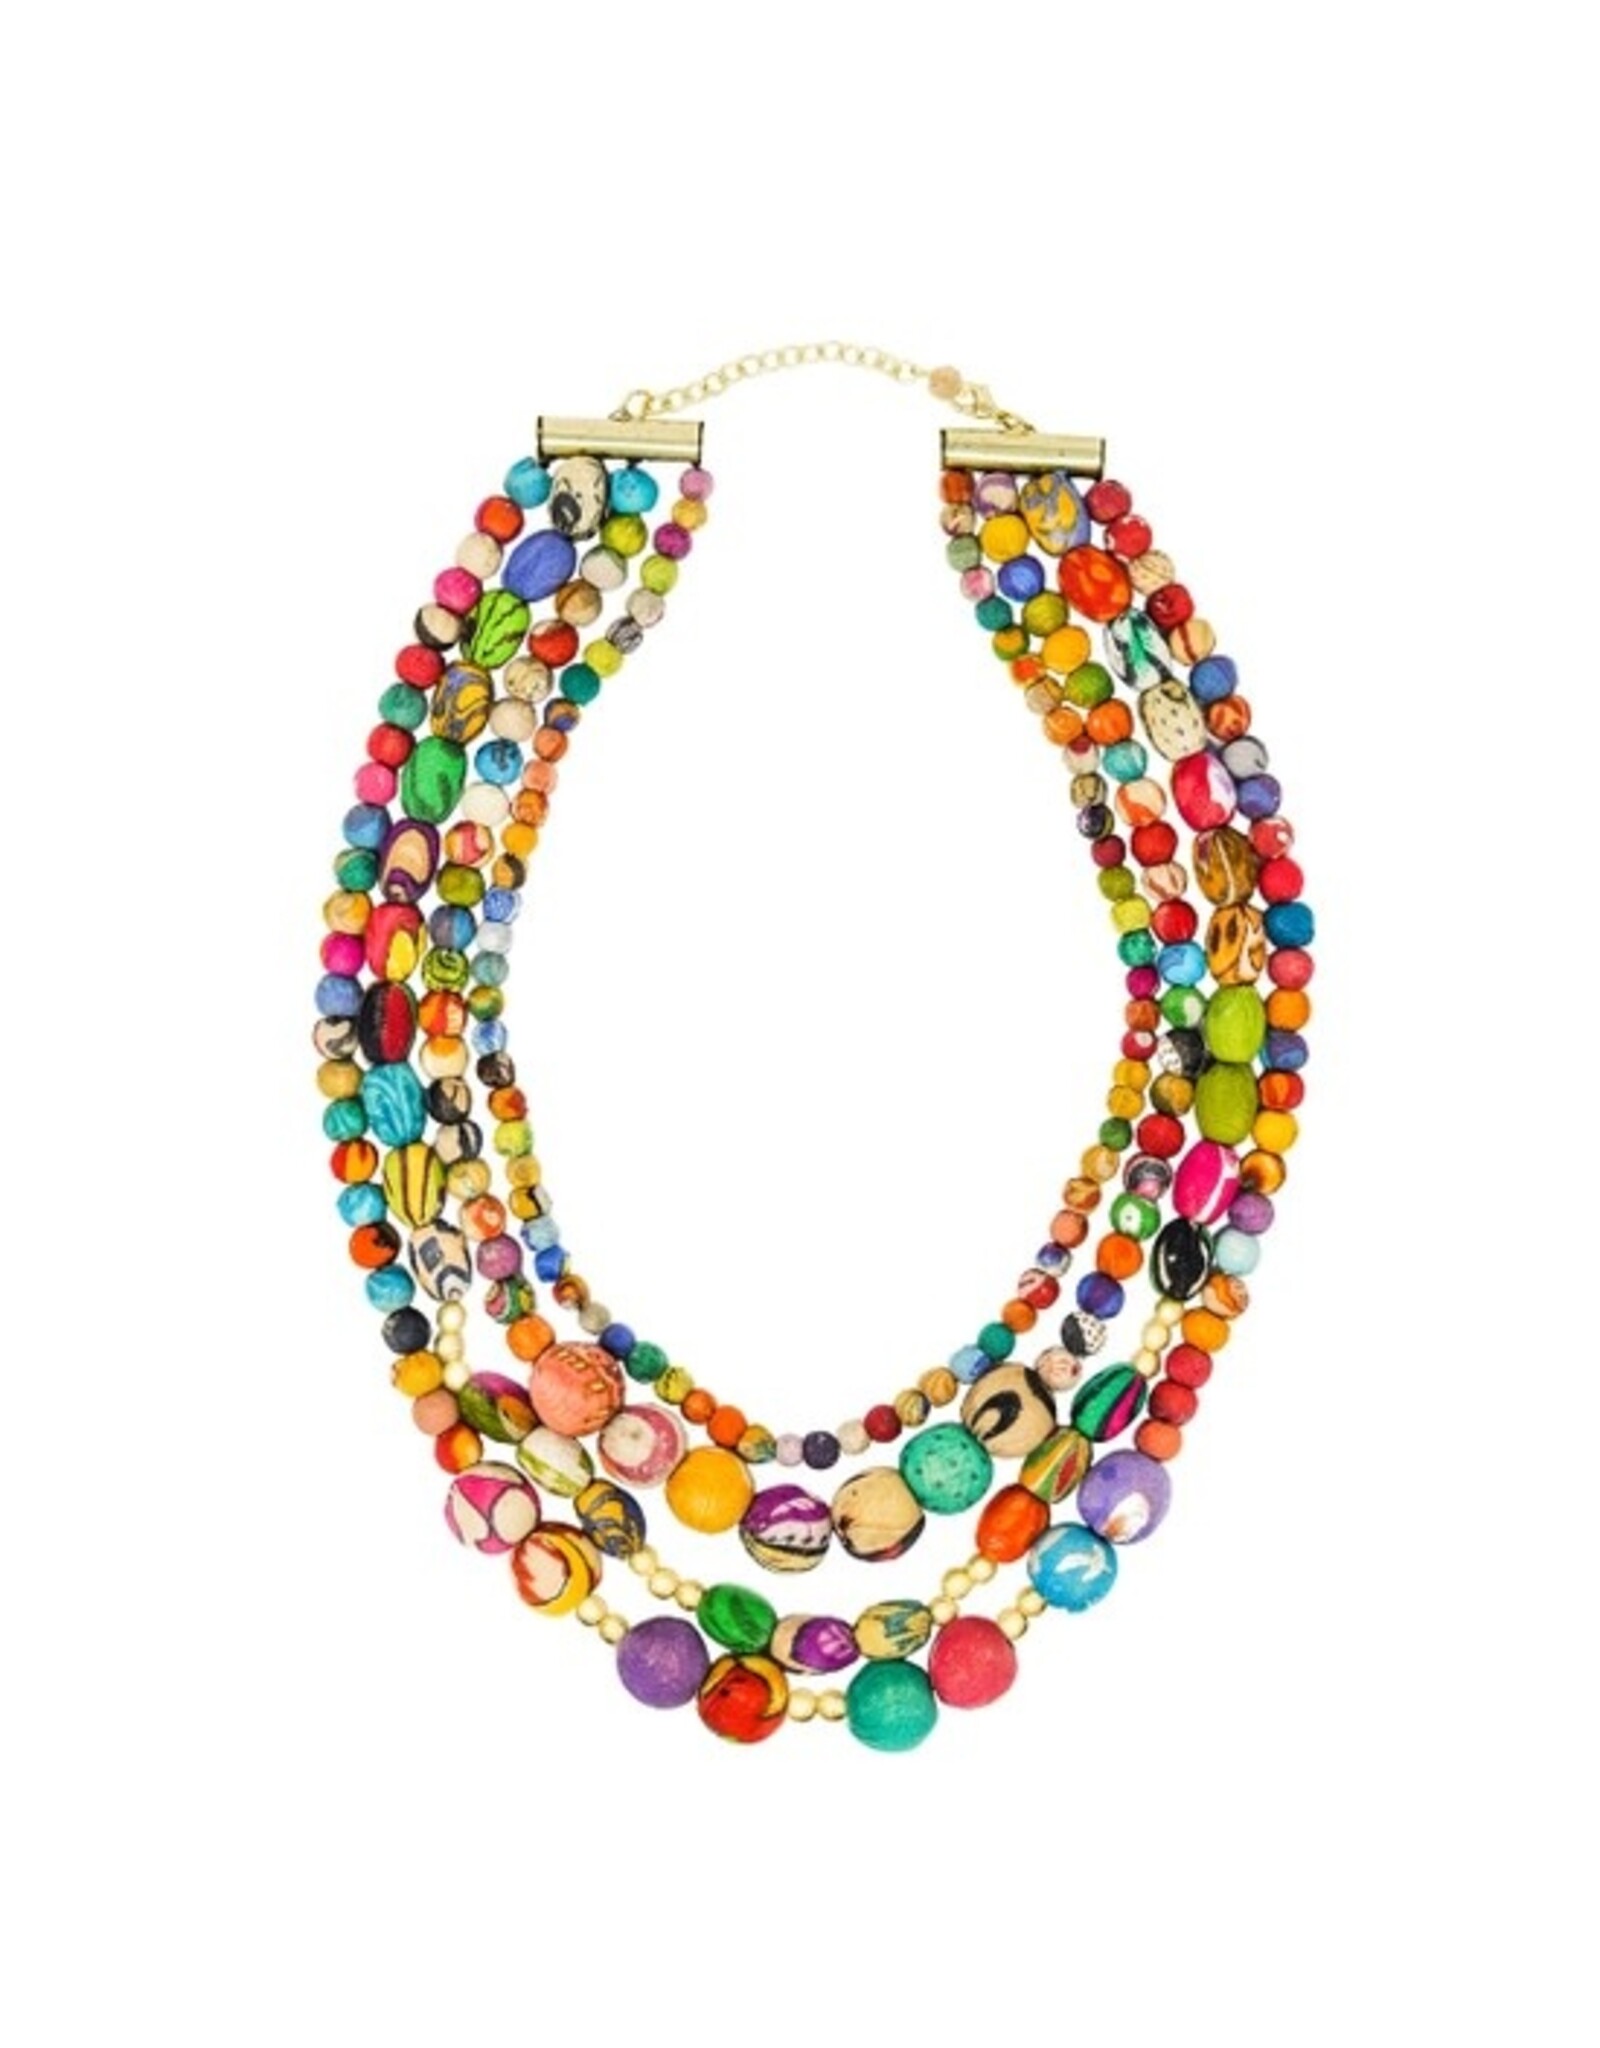 Trade roots Kantha Aura Necklace, India